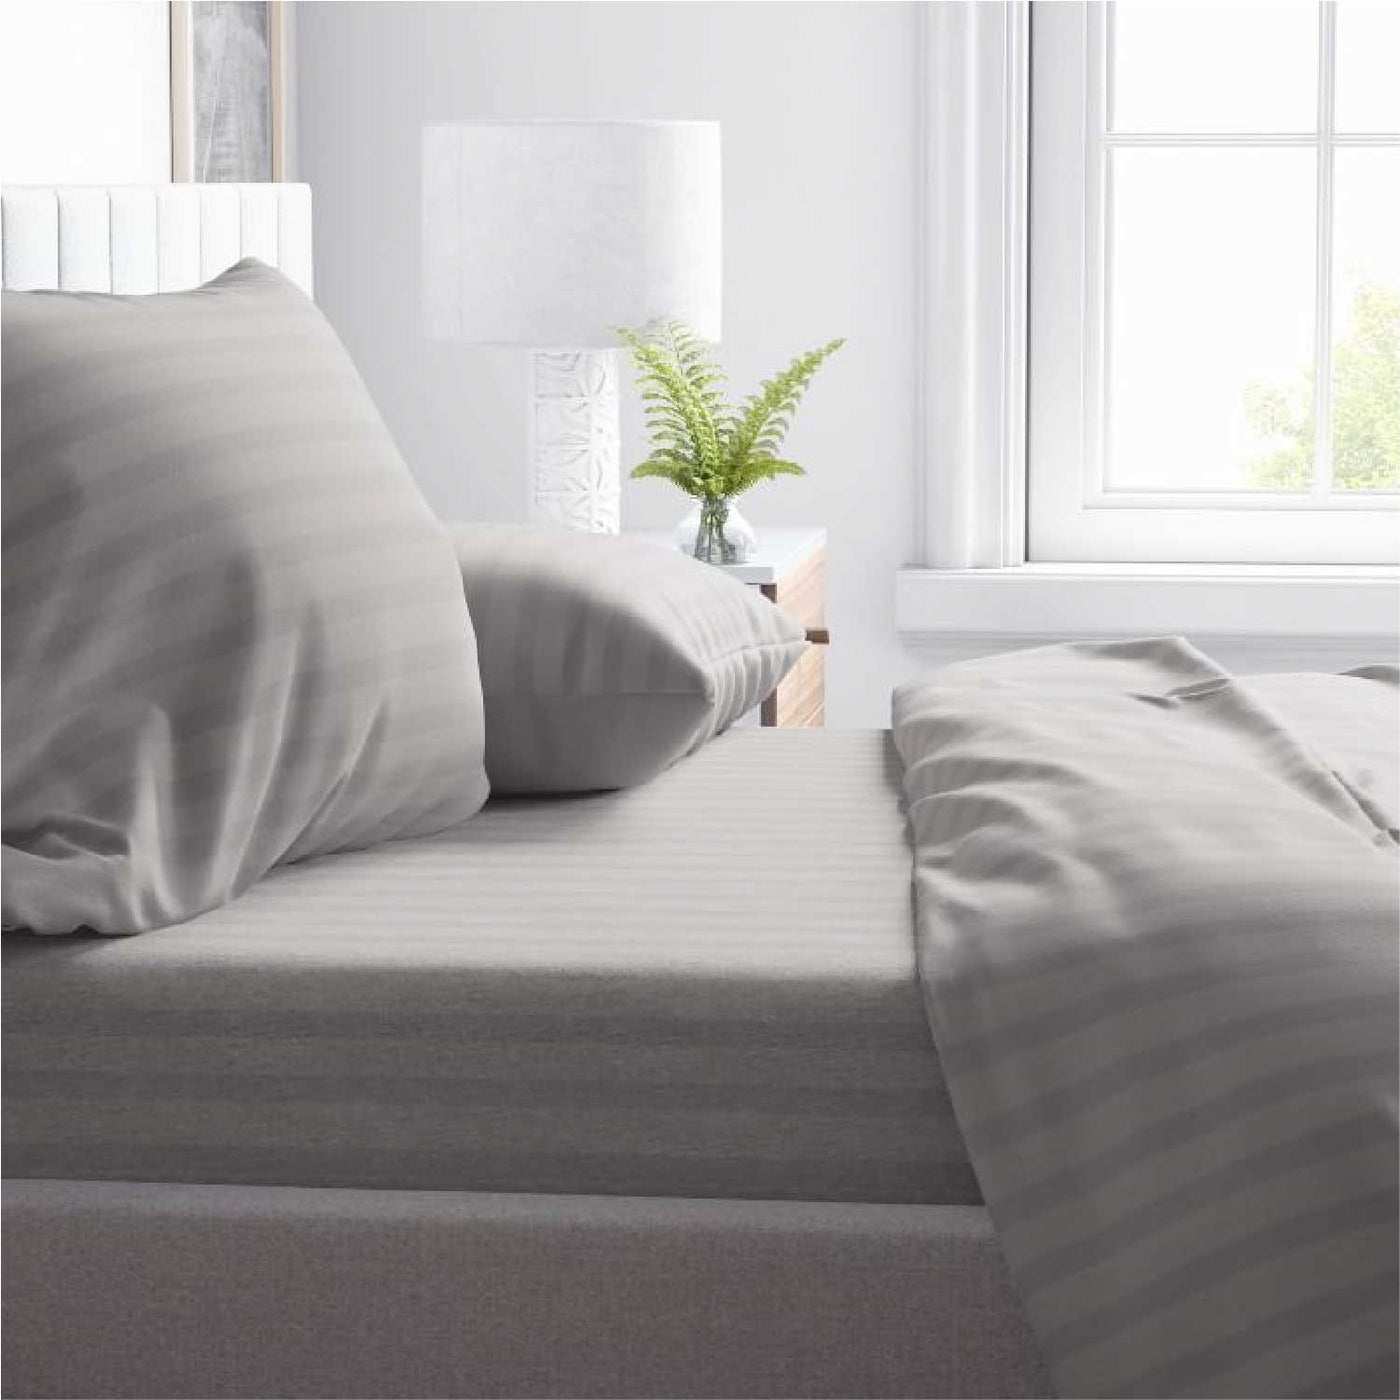 4 Piece Striped Bed Sheet Set 100% Egyptian Cotton 600 Thread Count